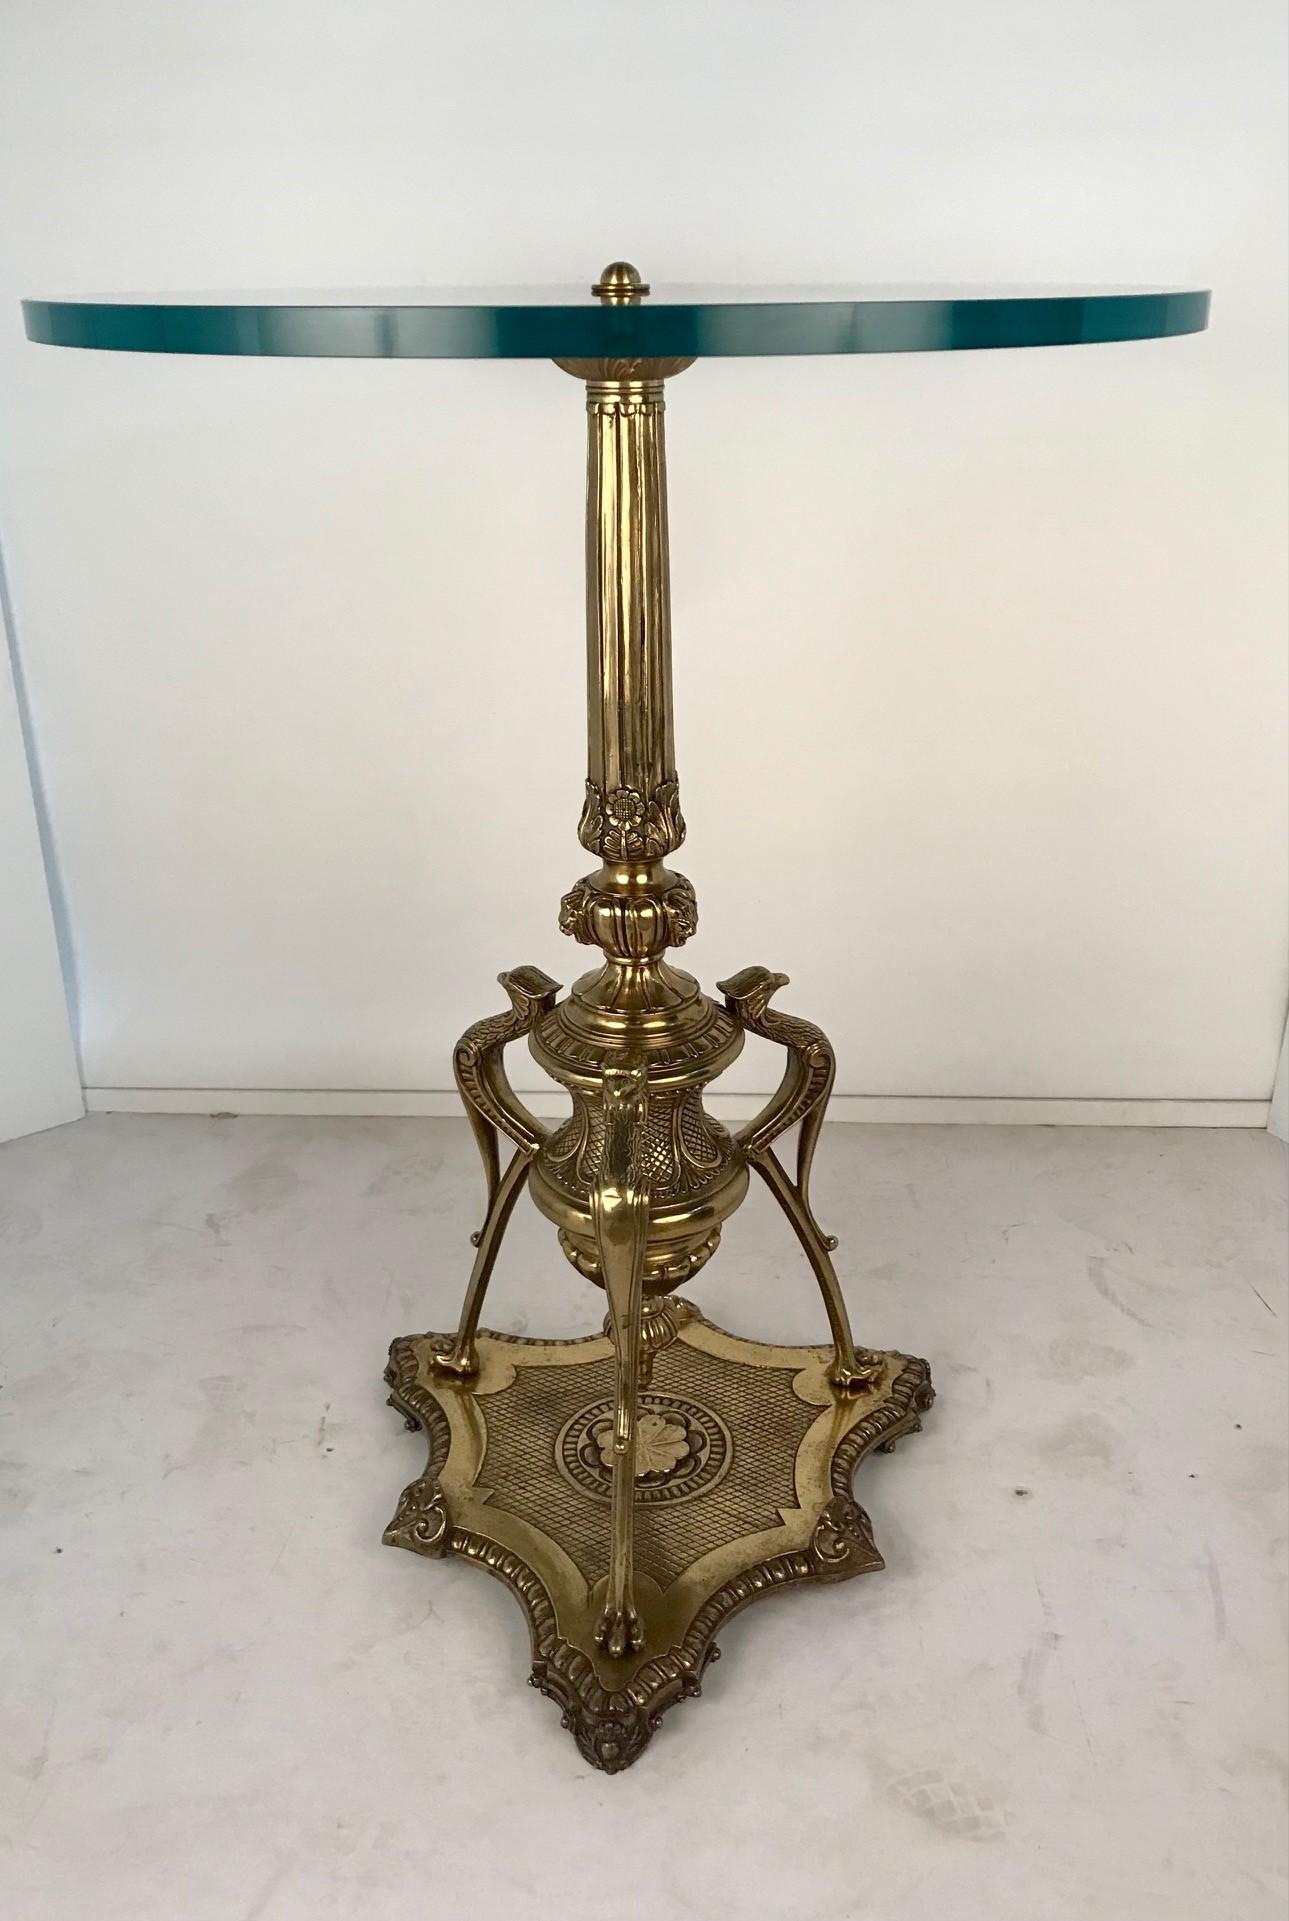 This unusual table stands on a heavy shaped tripod base .The  turned baluster stem is vase-shaped and supported by three long-legged birds. The base and stem are extensively modelled with leaves and lobed motifs and then highly polished.